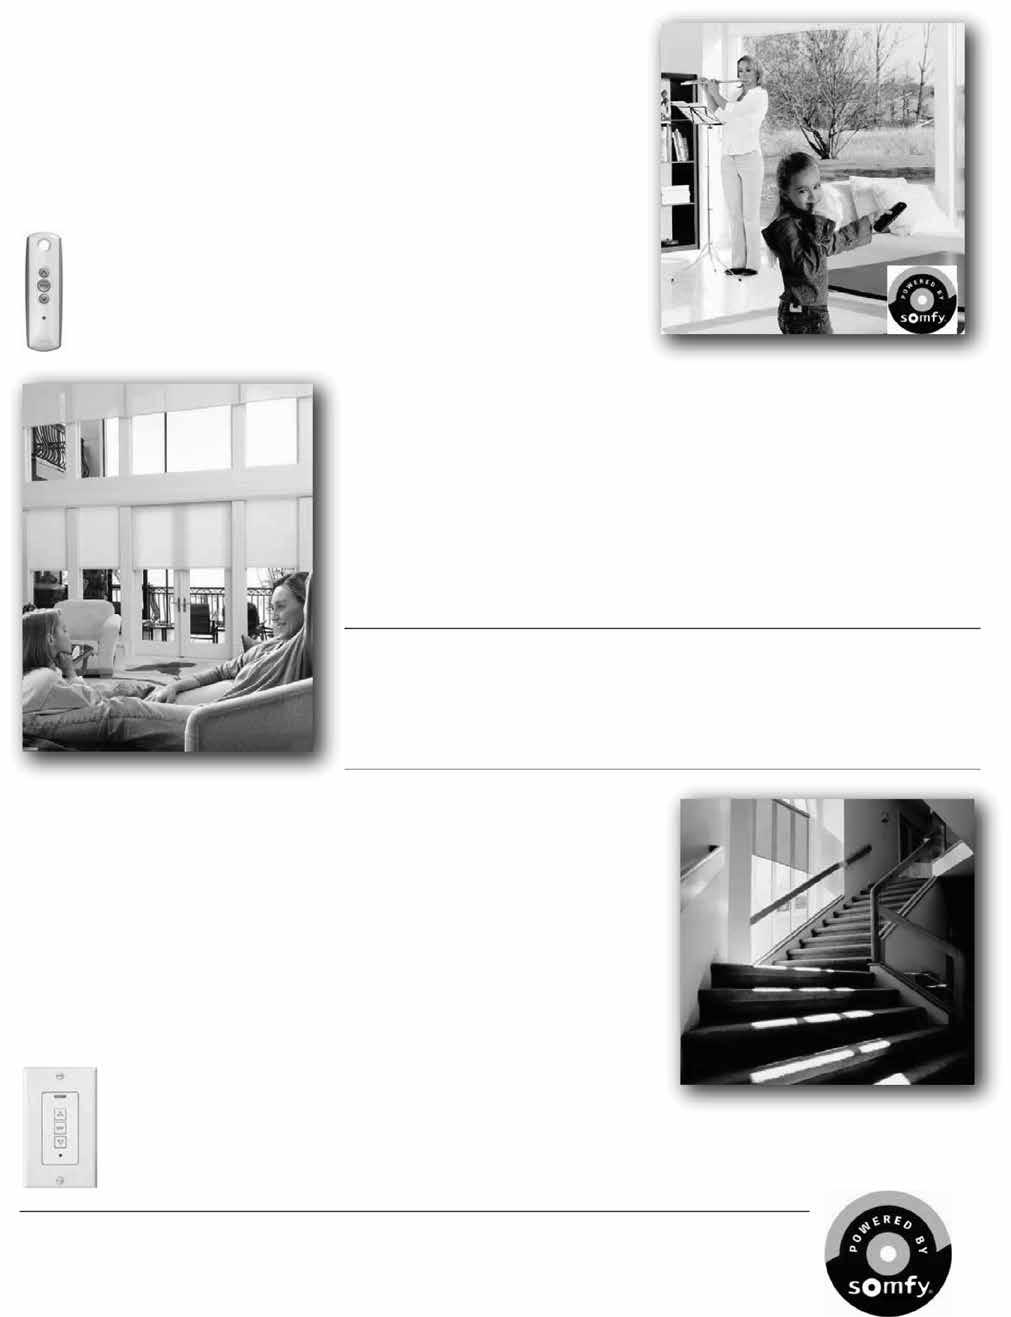 REMOTELIFT MOTORIZATION: OVERVIEW With RemoteLift motorized shades, enjoy a better quality of life and have more time to enjoy life s daily pleasures.